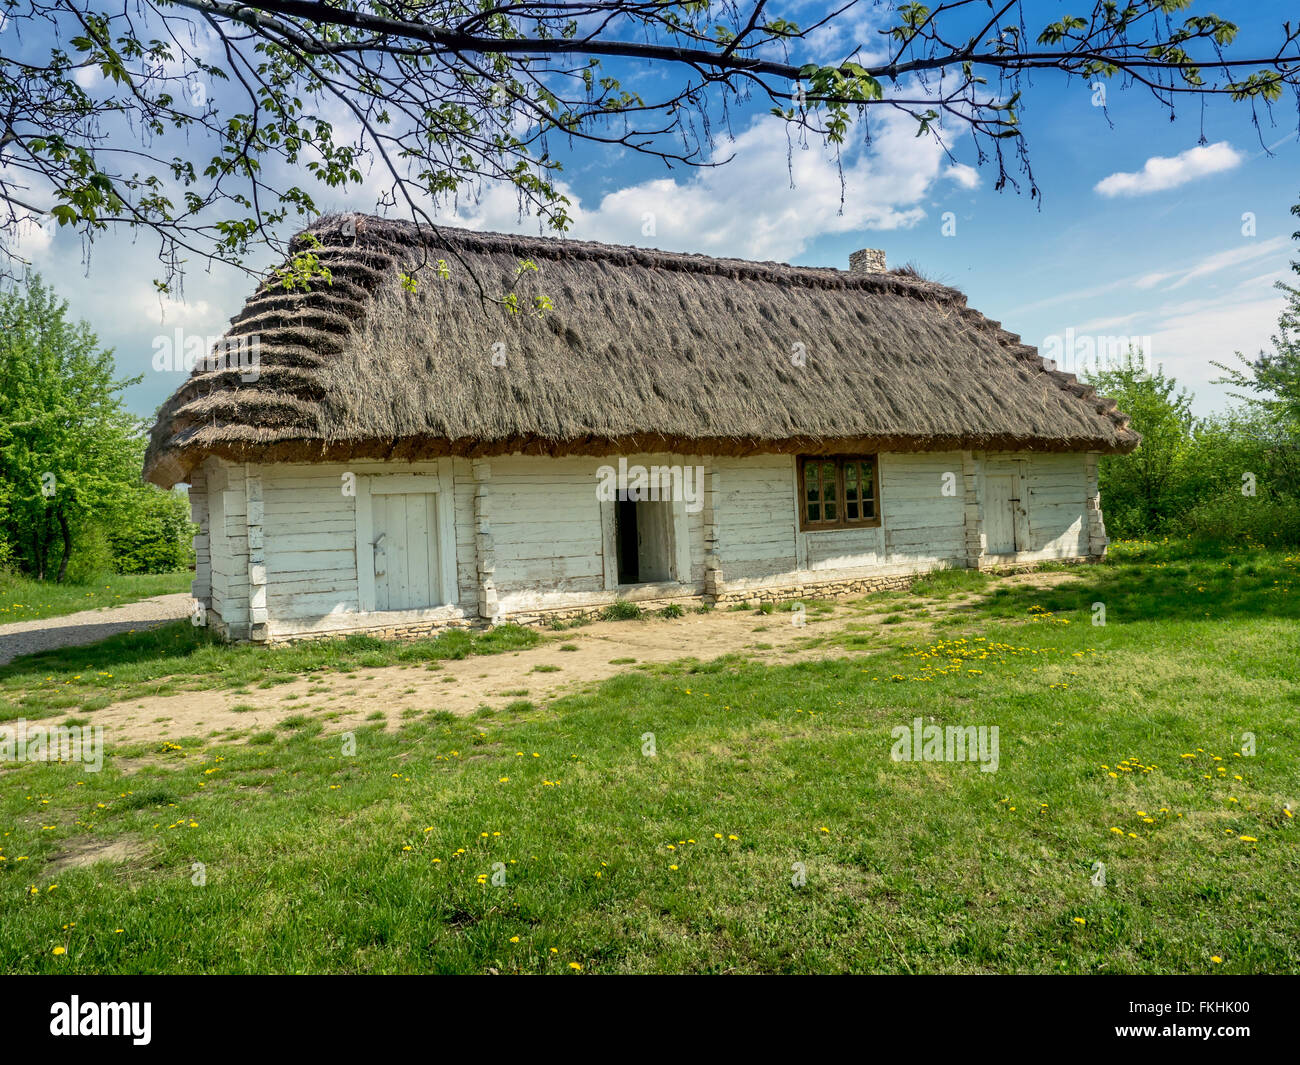 Old style thatched wooden cottage with white walls Stock Photo